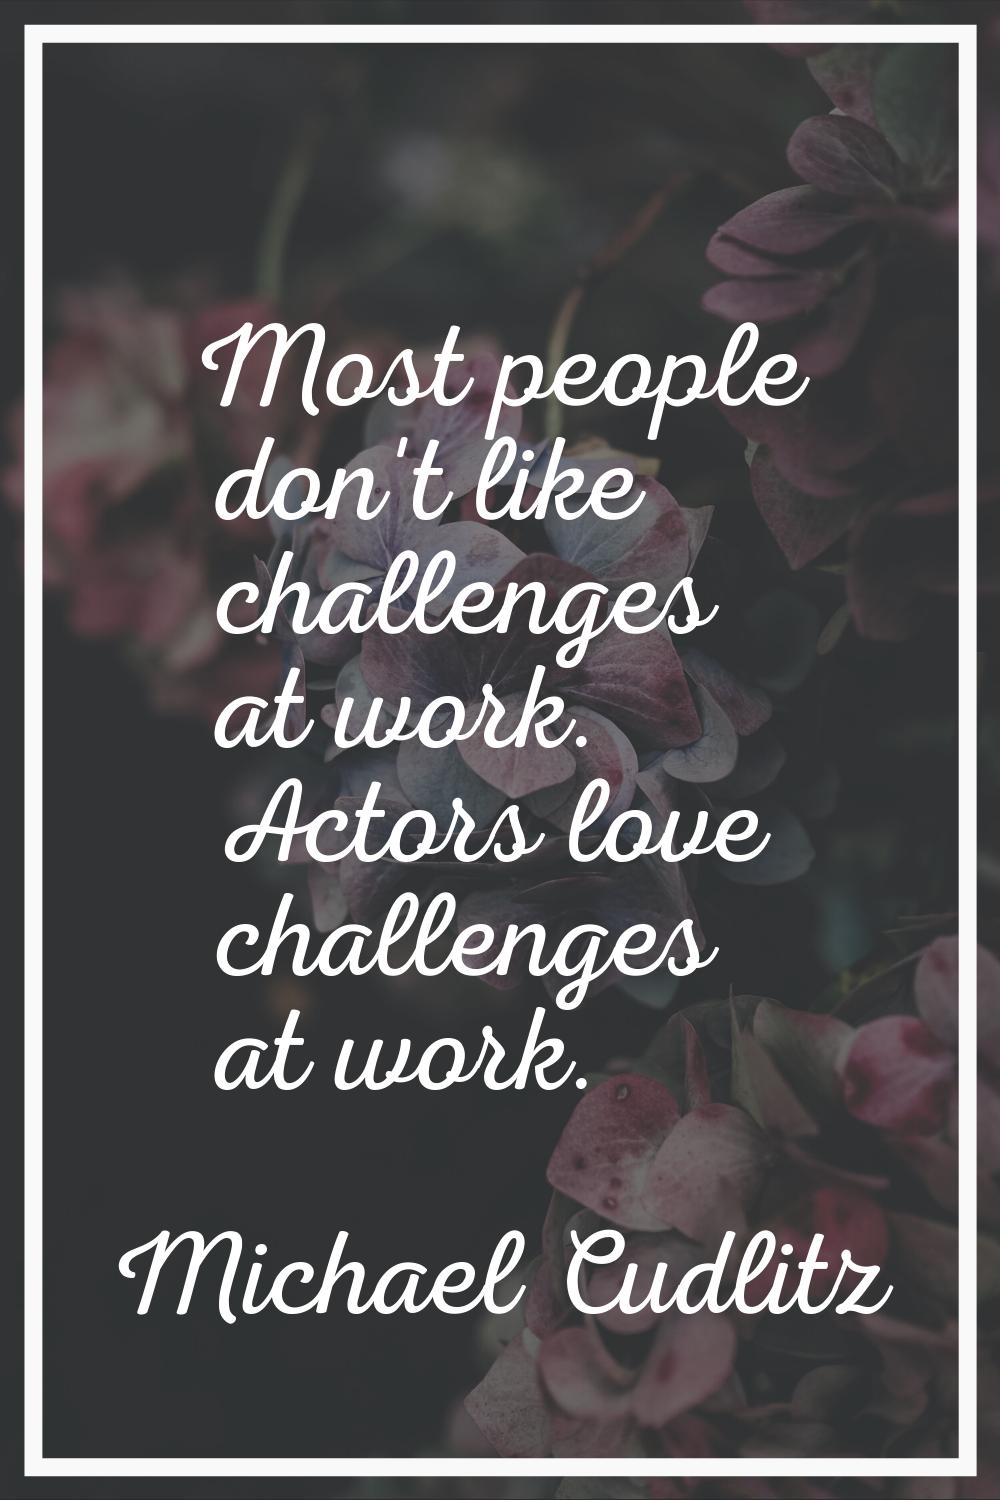 Most people don't like challenges at work. Actors love challenges at work.